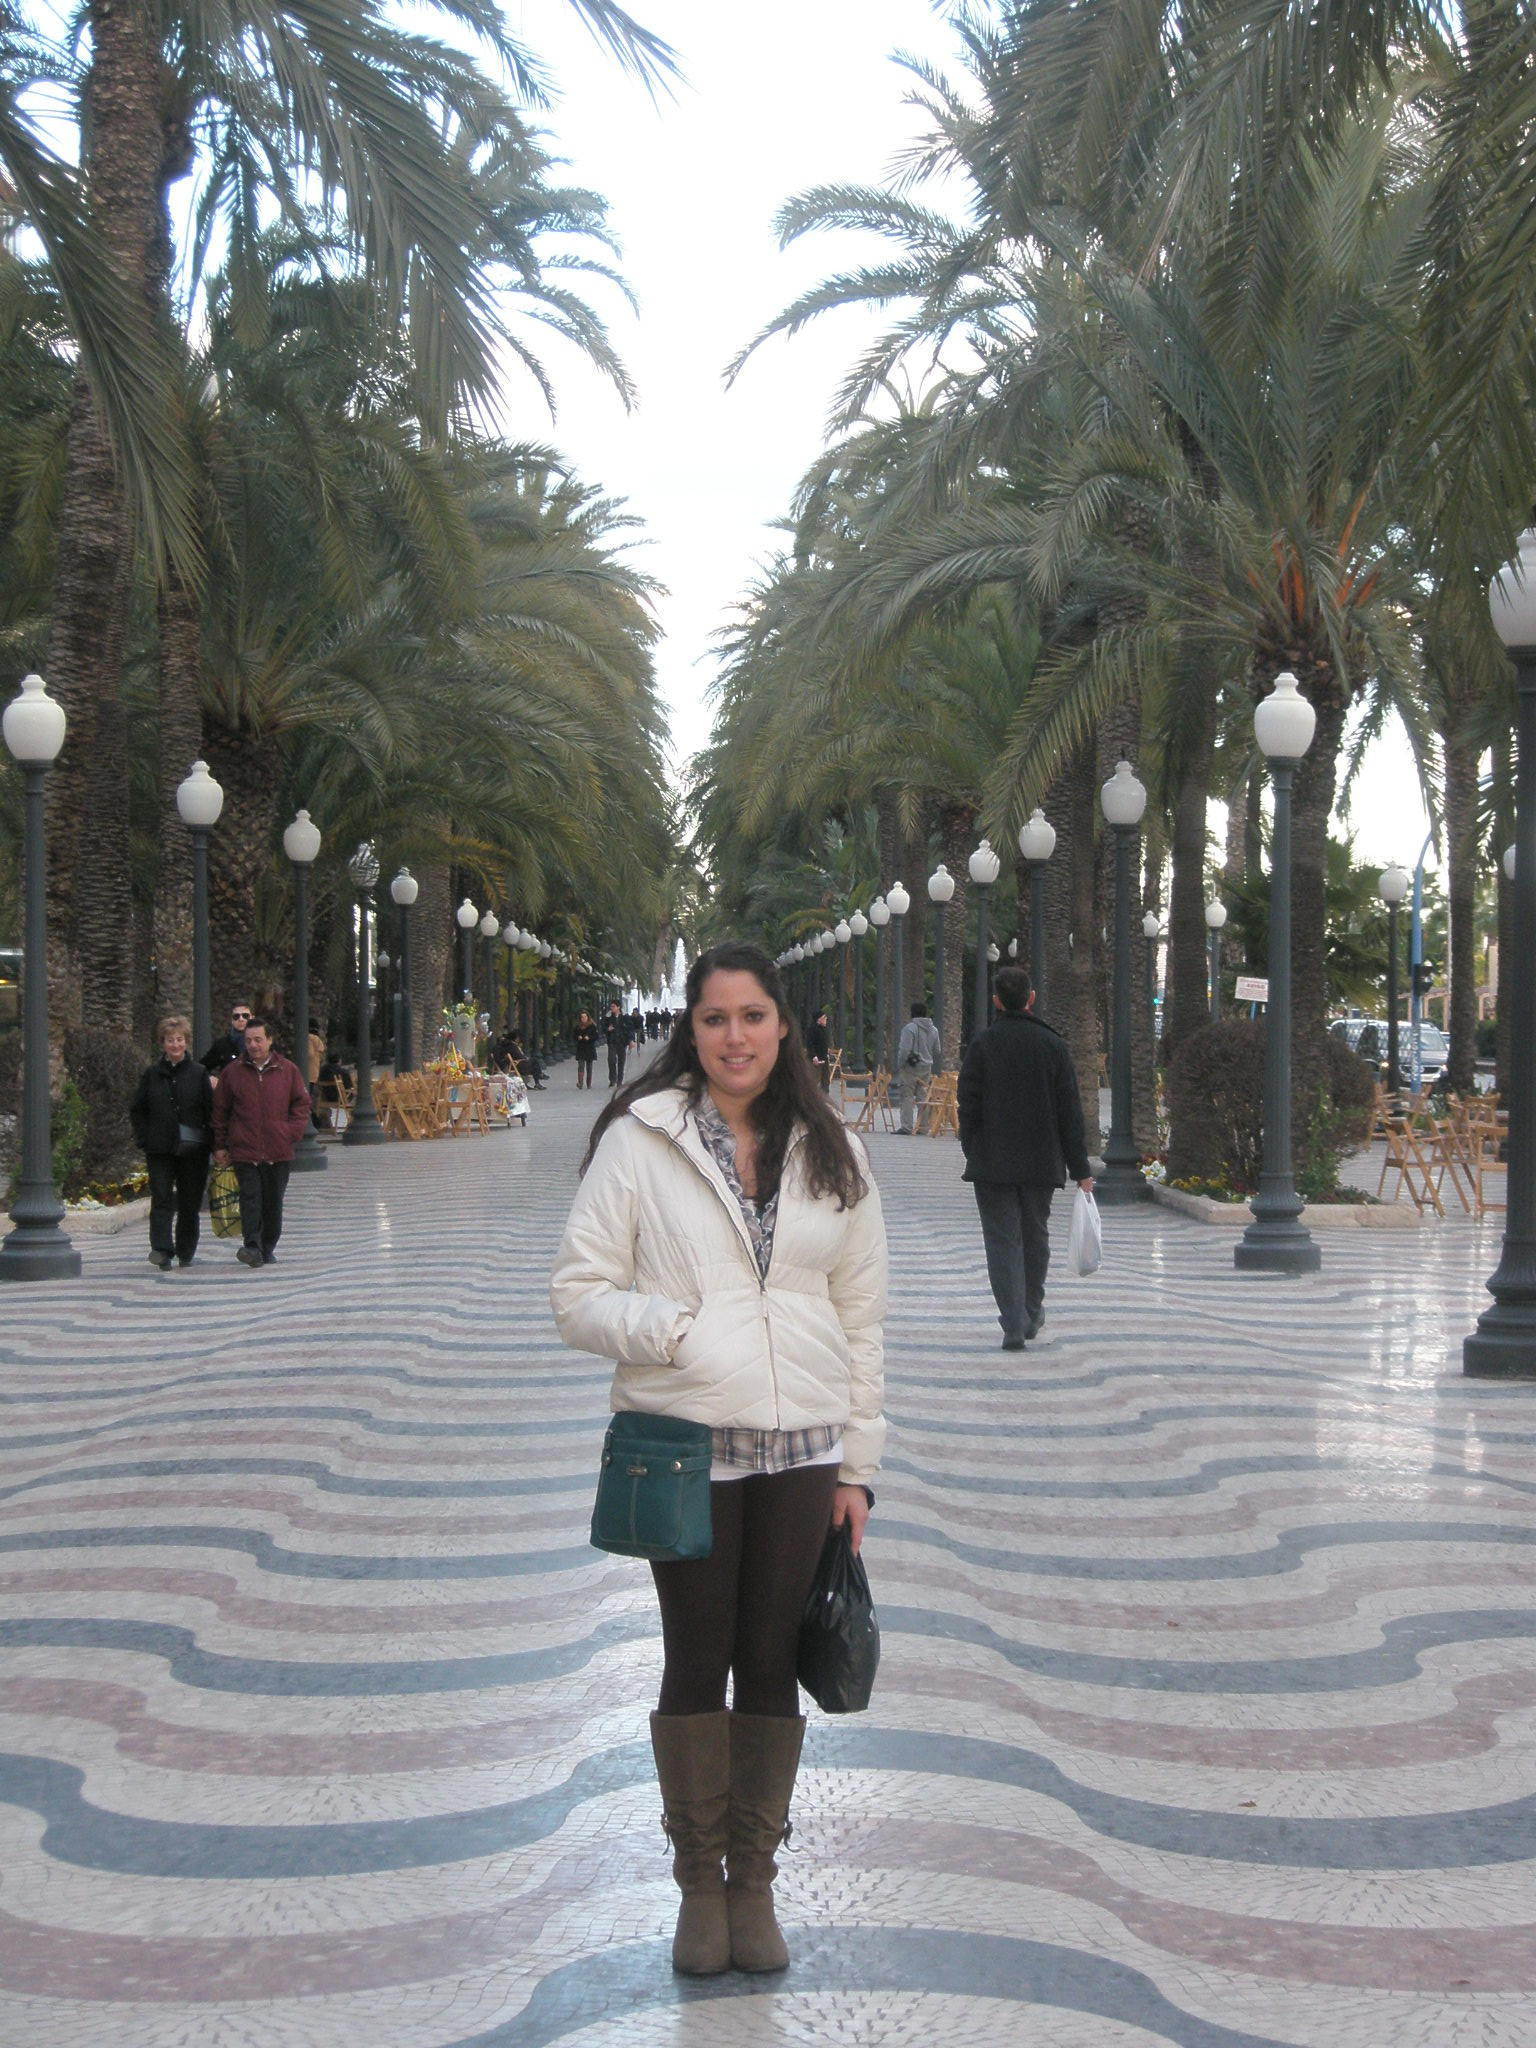 Making a home for herself in Alicante was top of Dani’s list when she arrived in Spain.